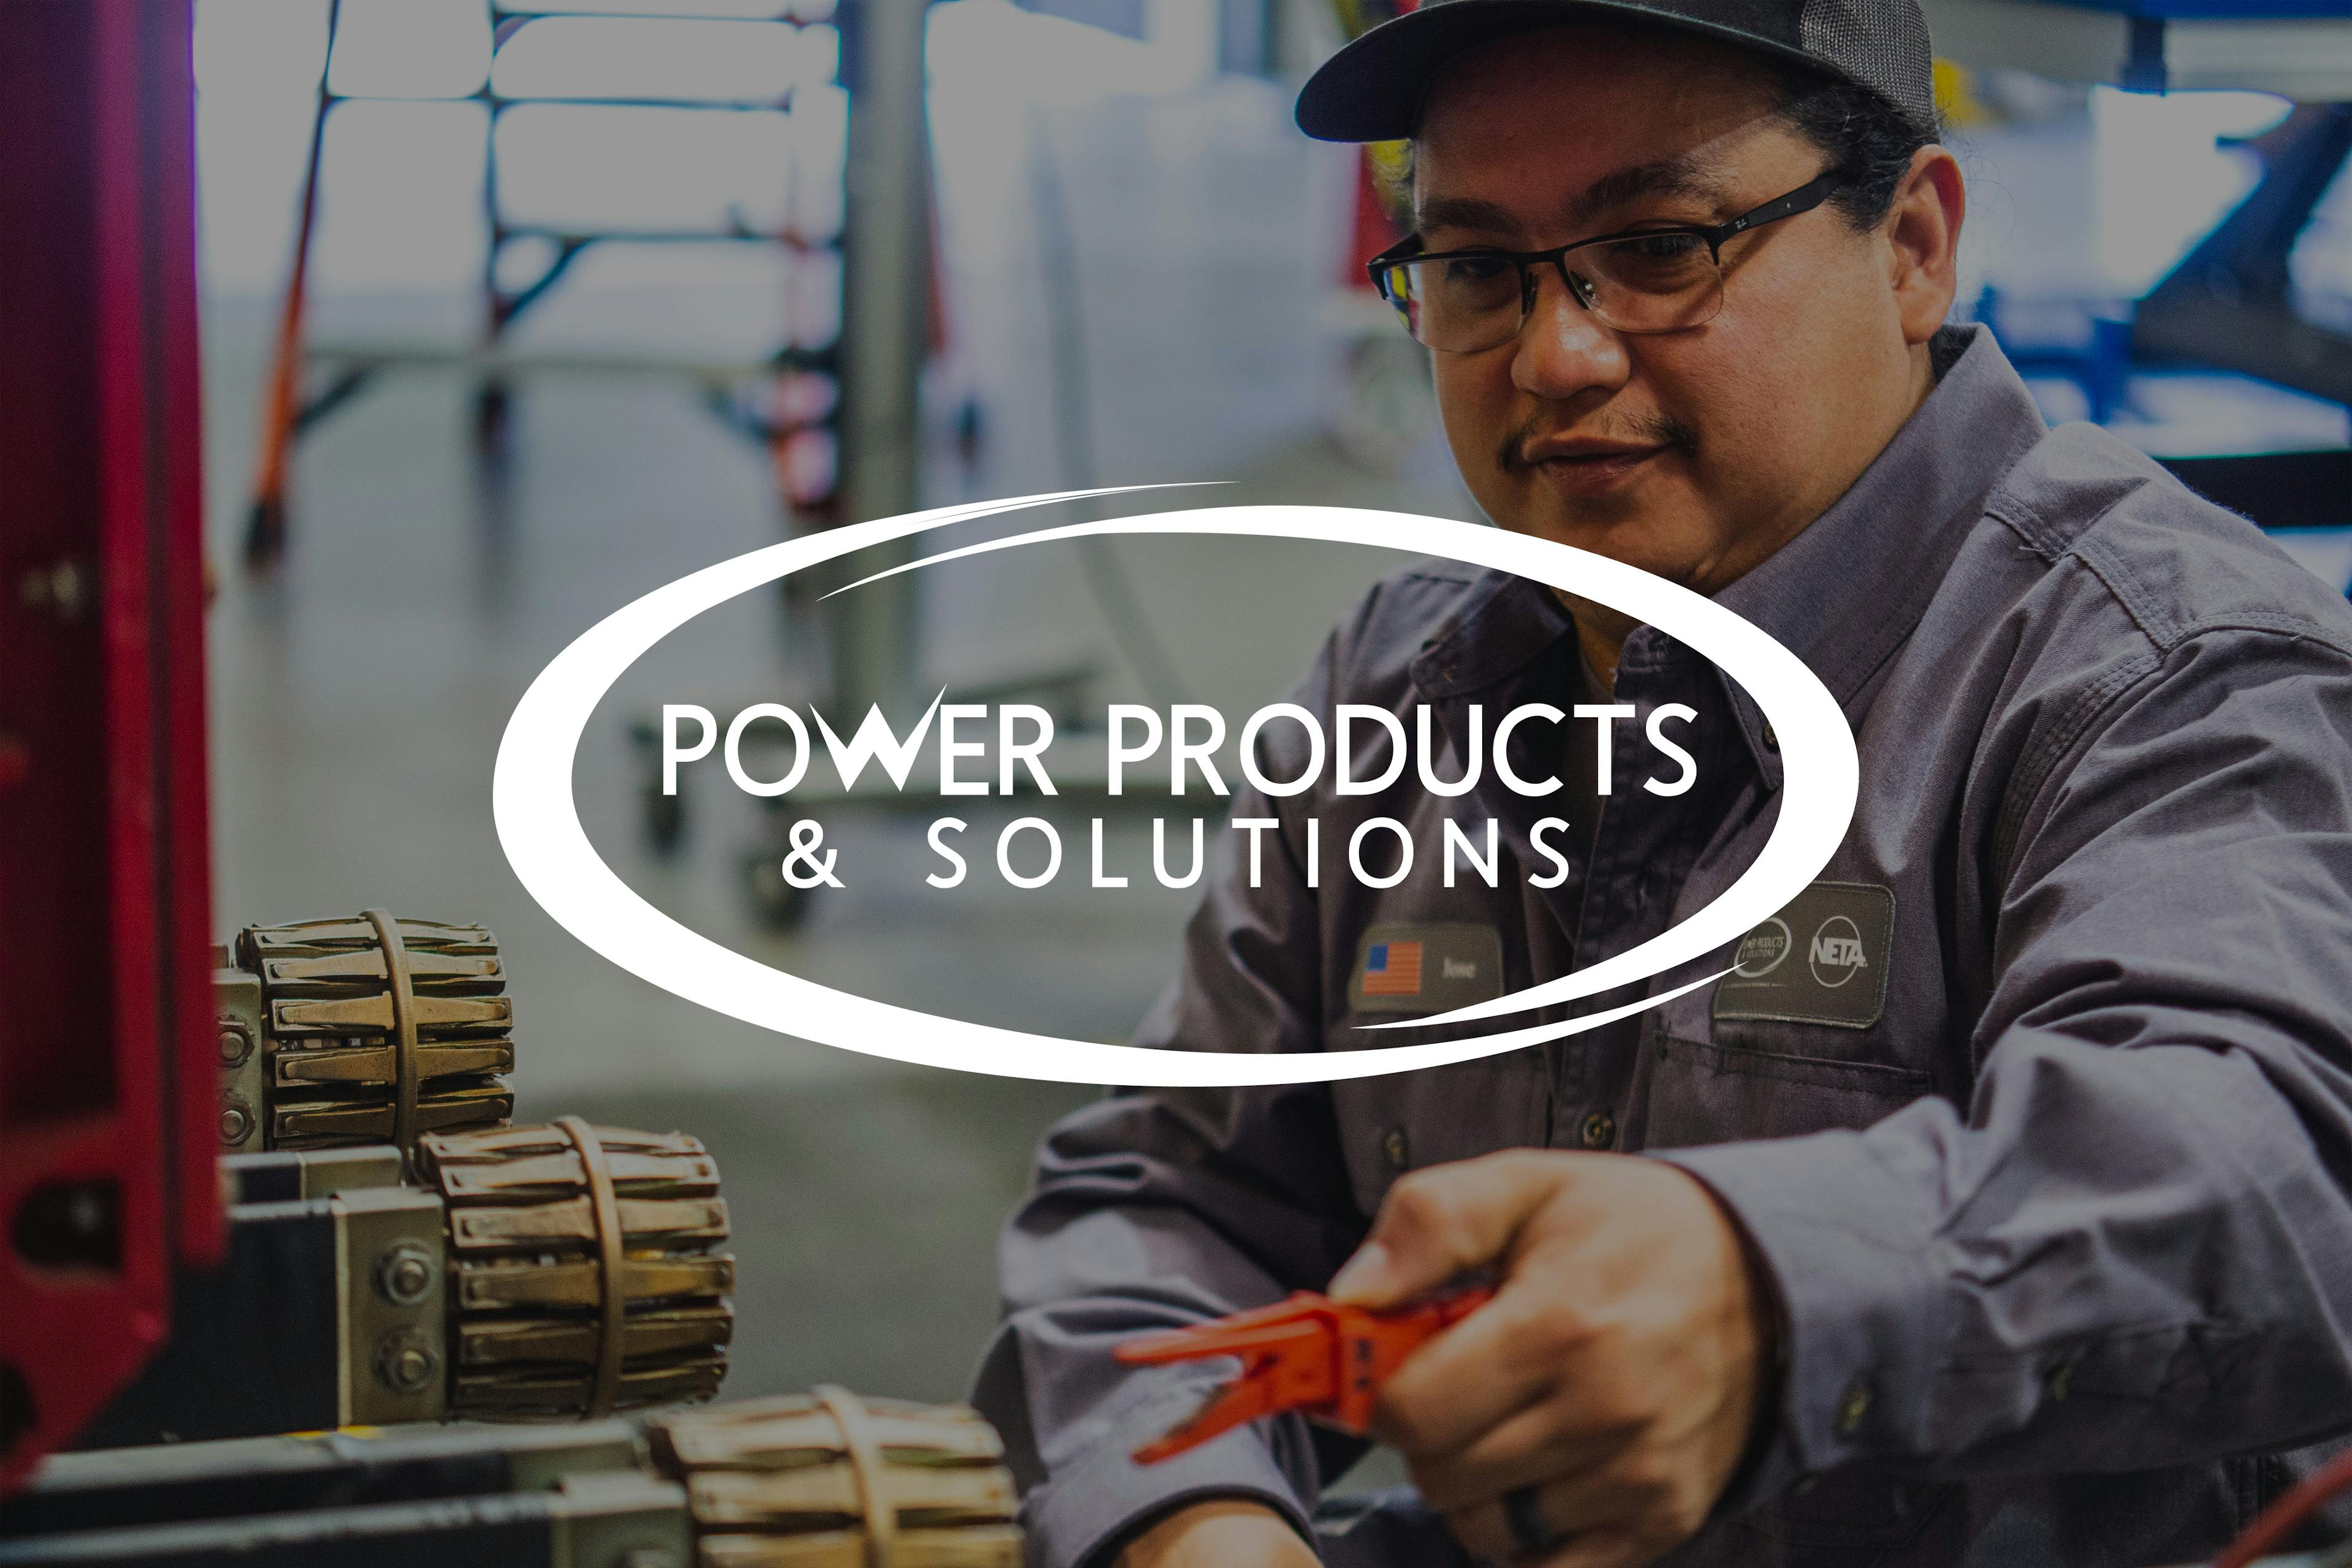 power products and solutions branded image